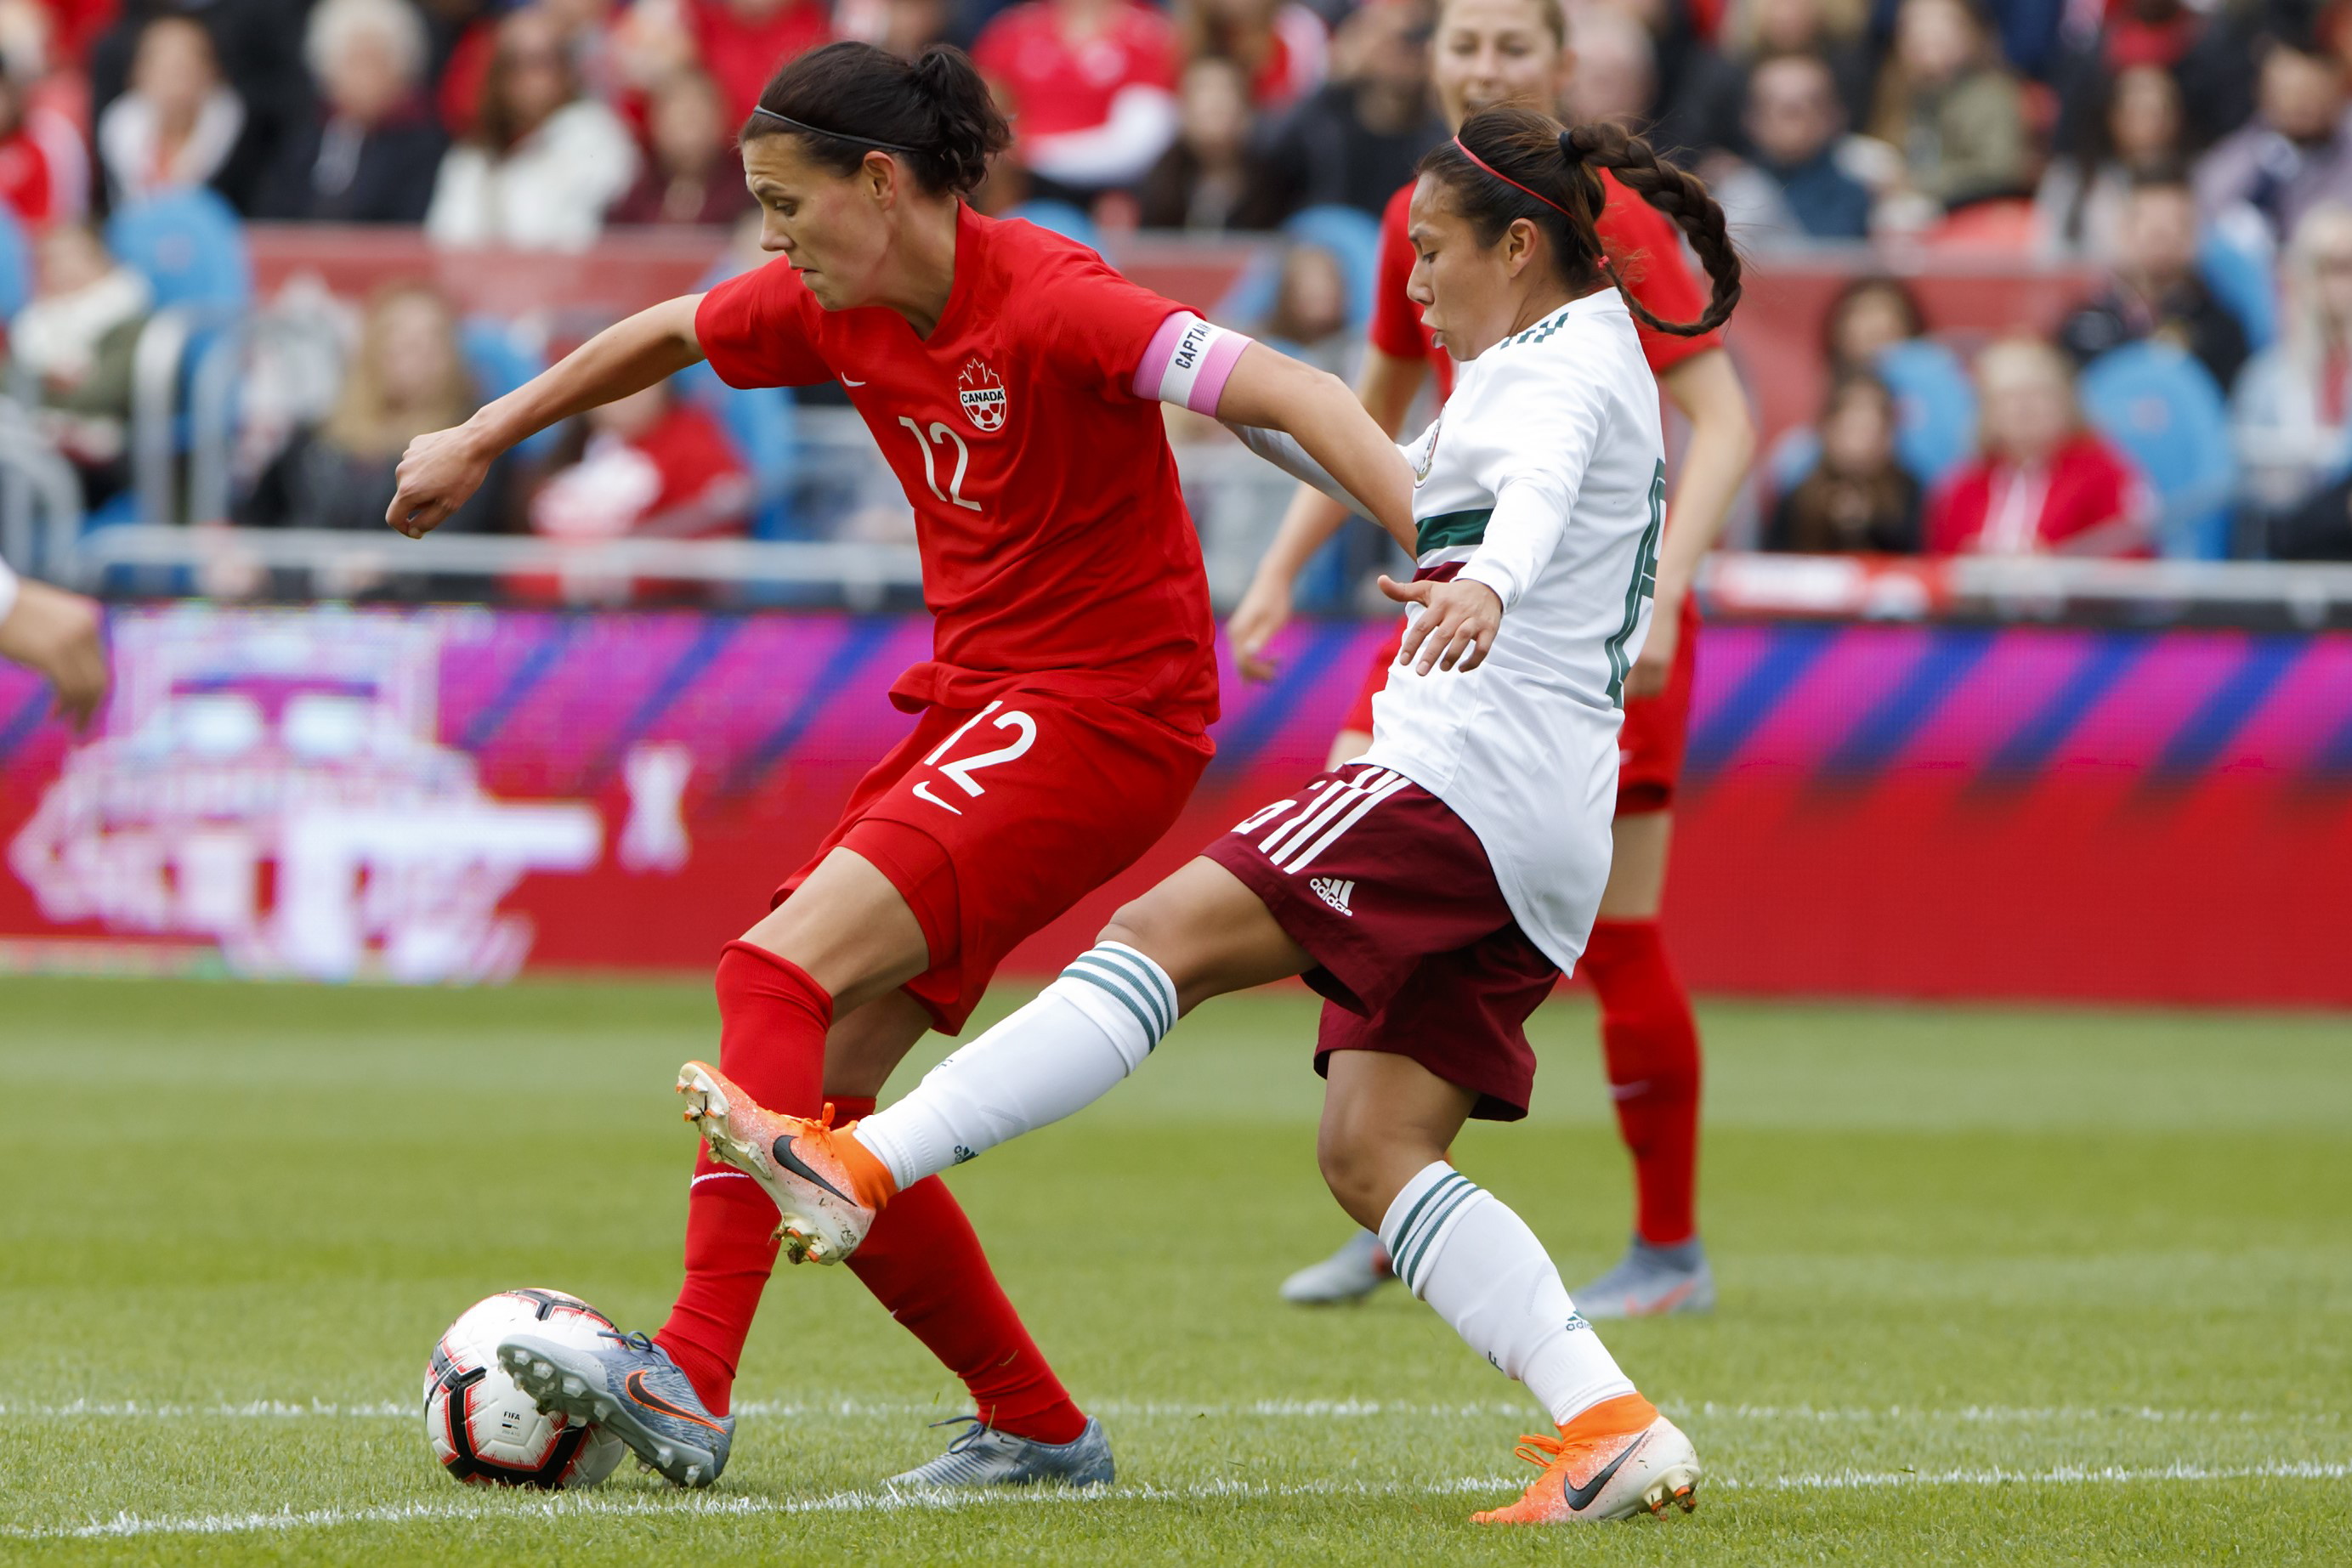 Concacaf Championship standing between women's soccer and Tokyo 2020